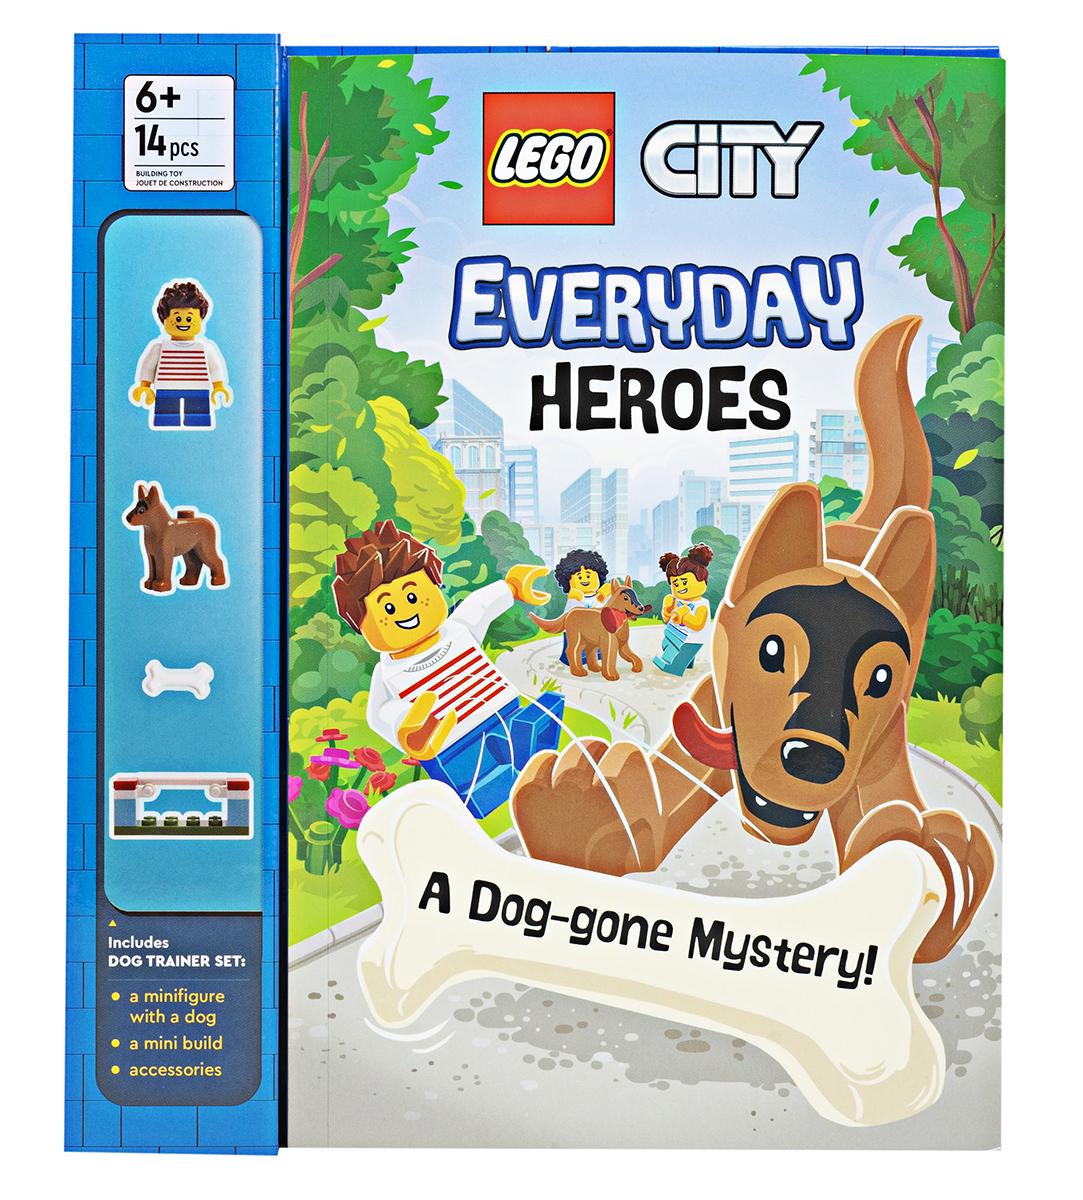  LEGO City: Everyday Heroes: A Dog-gone Mystery 